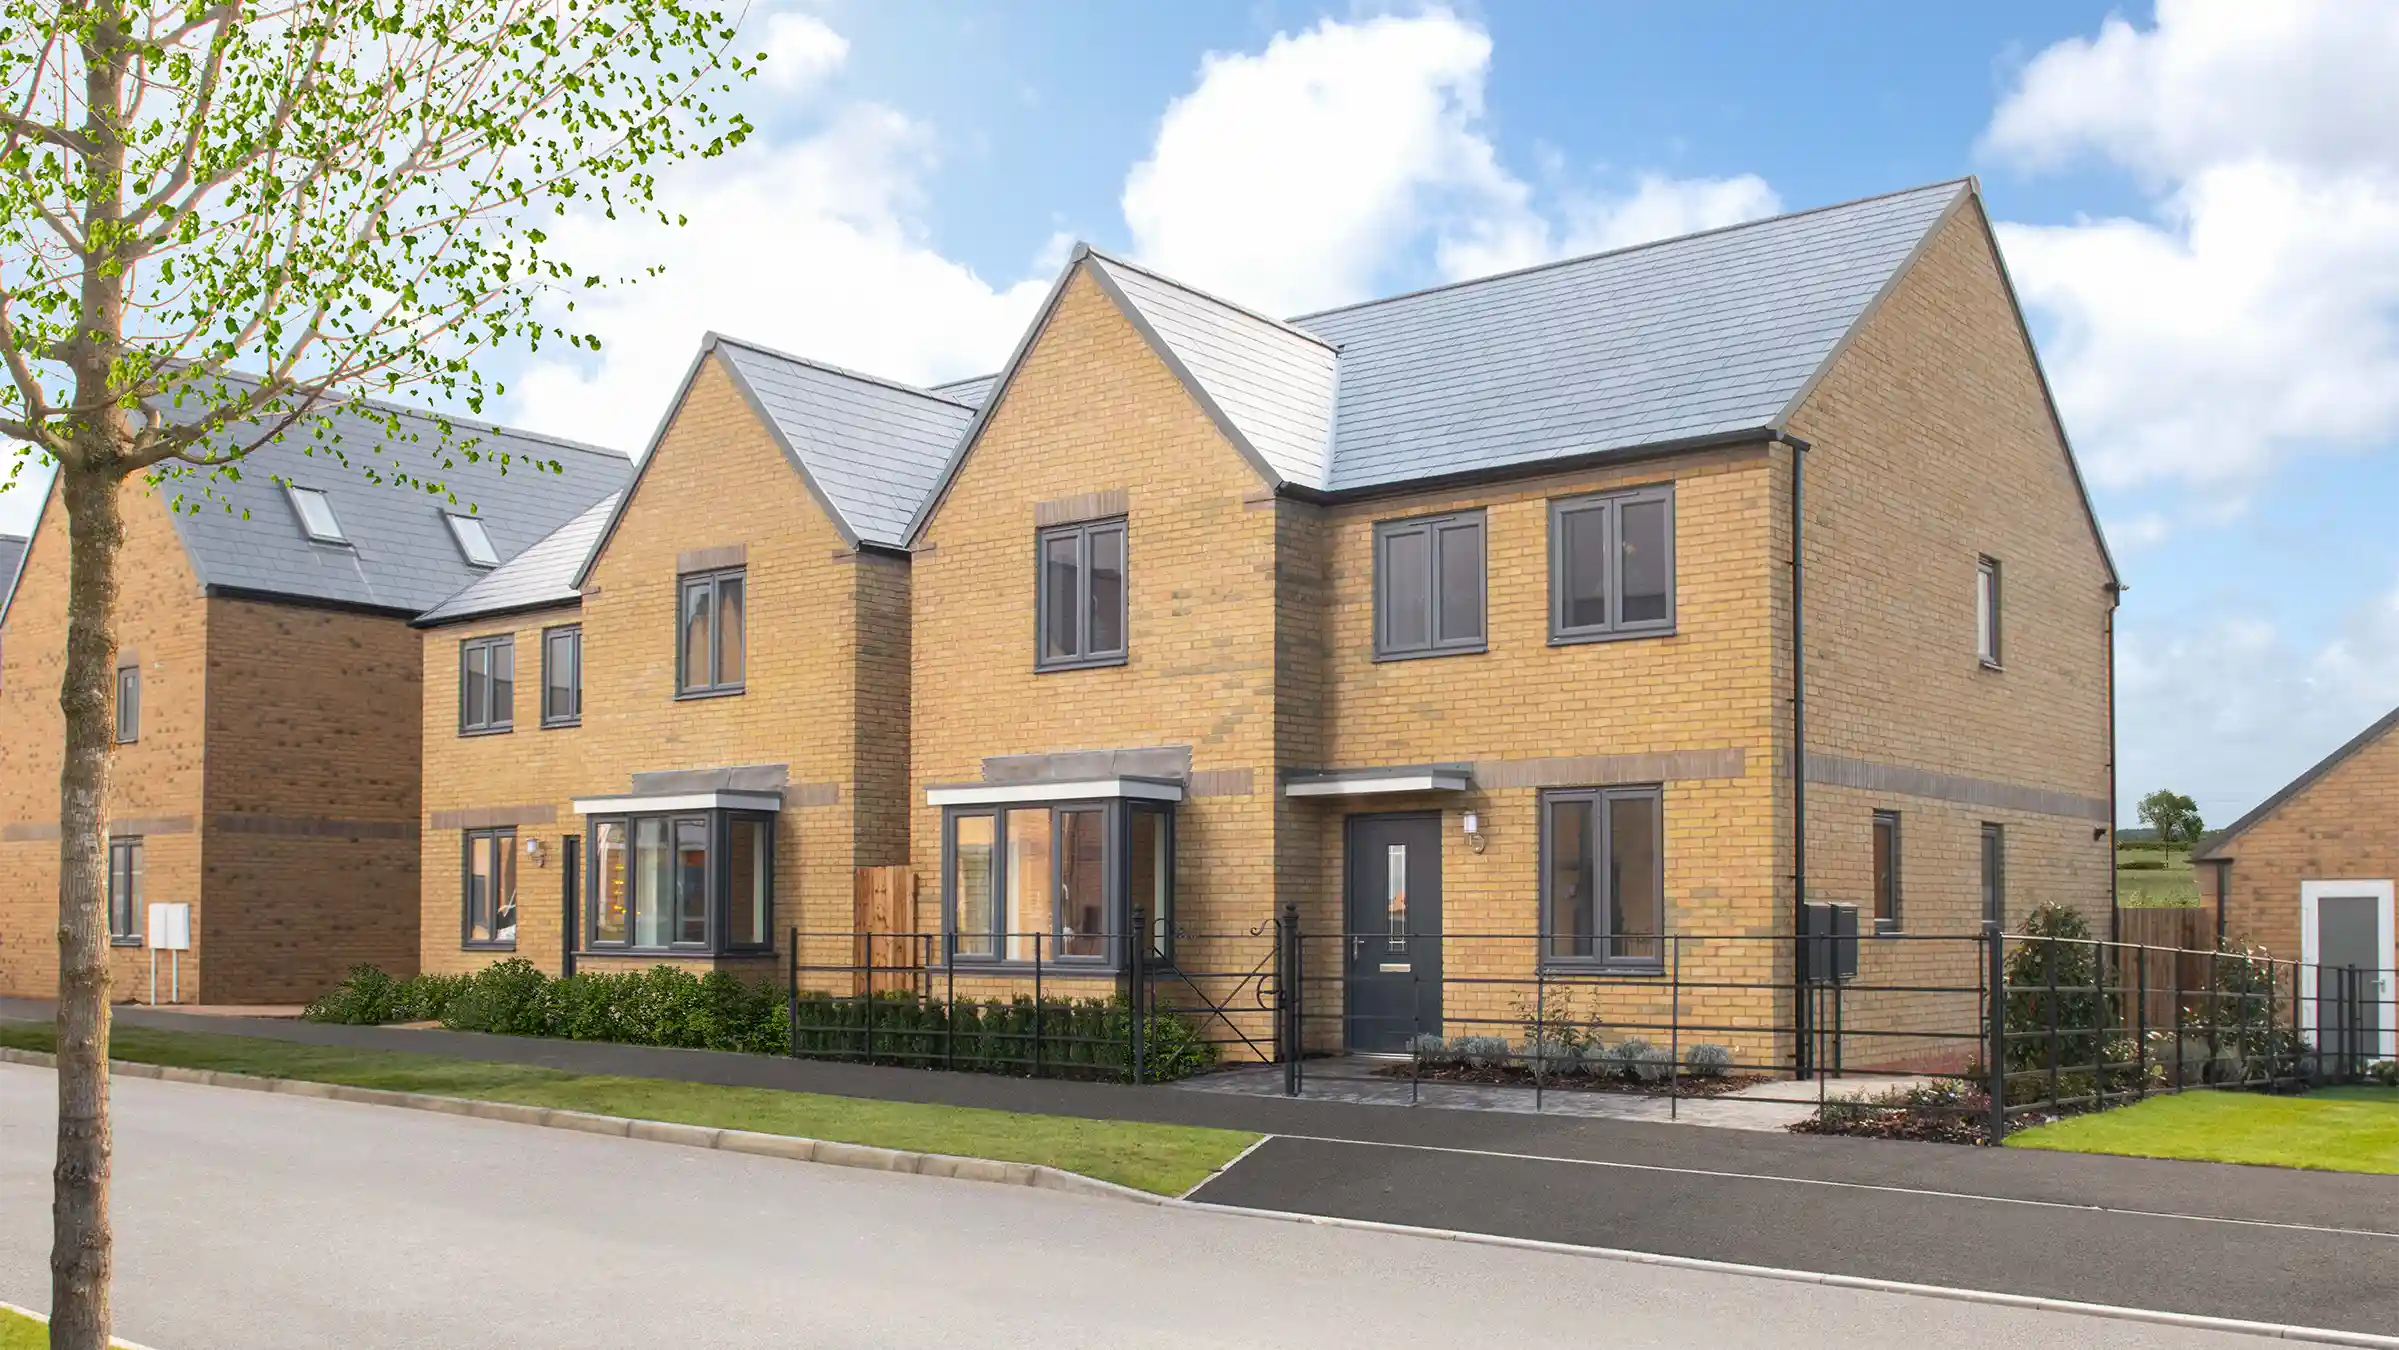 Artist's impression of exterior of David Wilson houses at Wintringham.